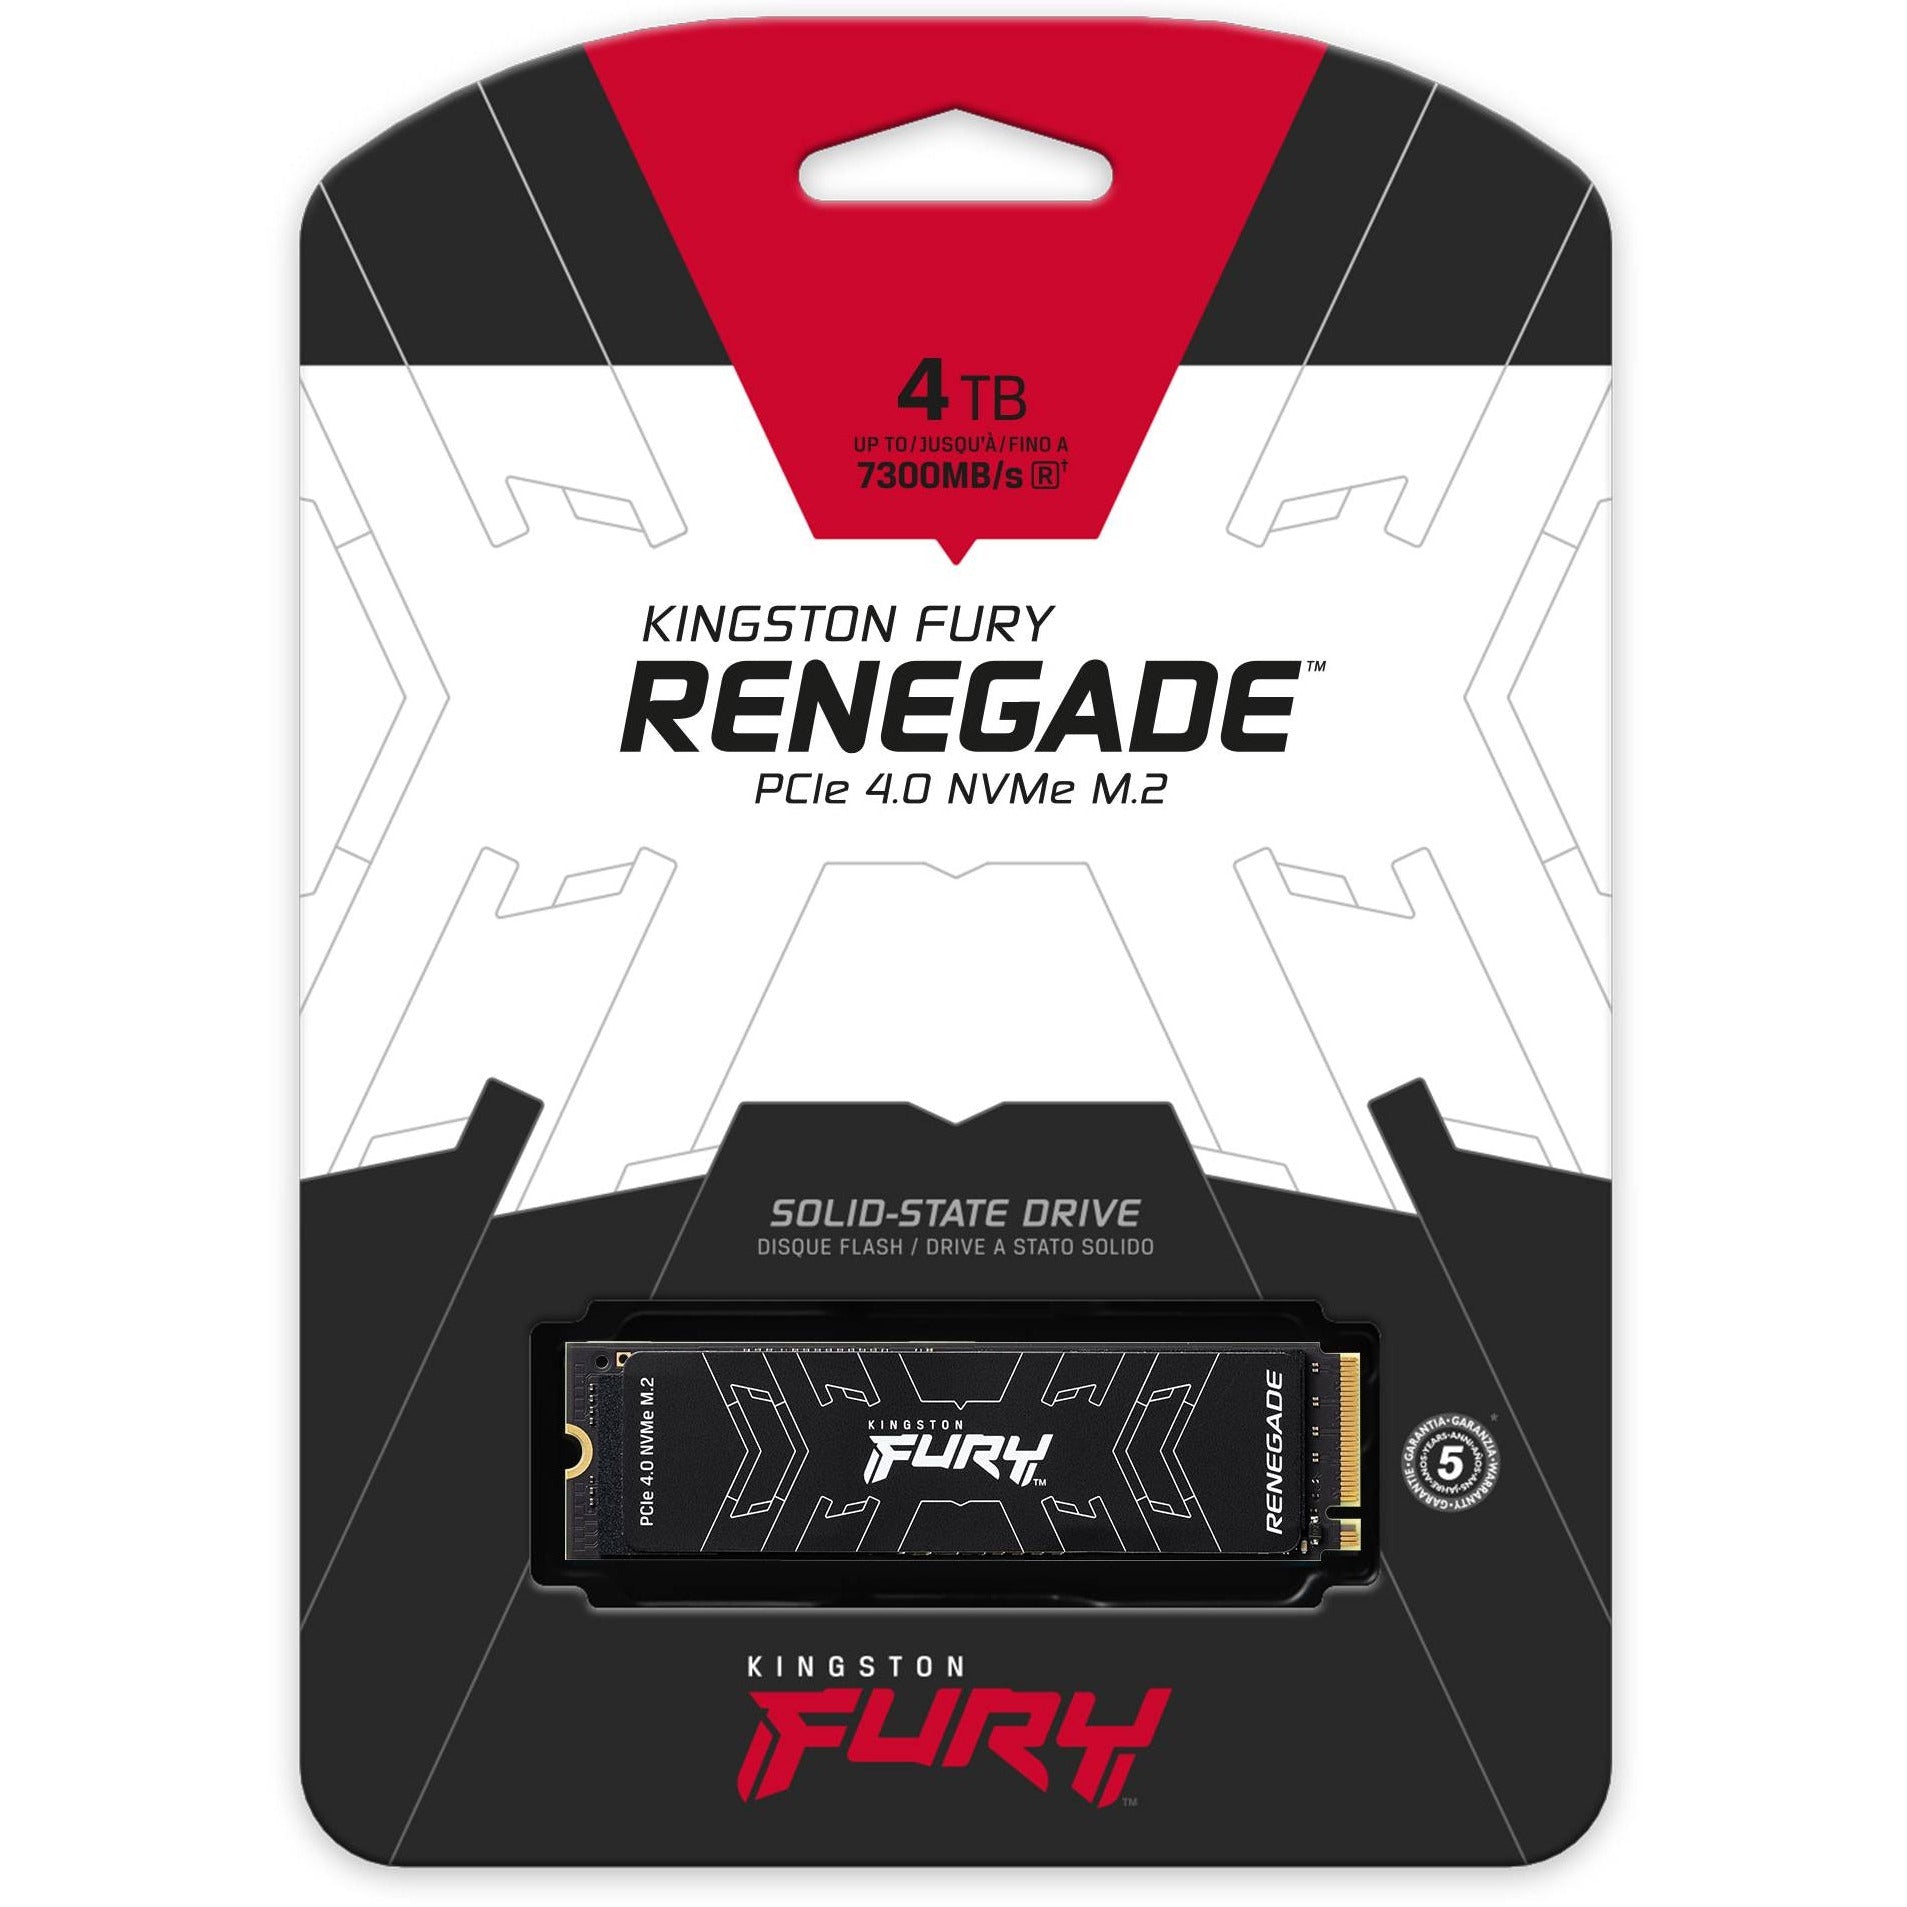 Kingston FURY Renegade 4TB PCIe 4.0 NVMe M.2 SSD up to 7,300MB/s